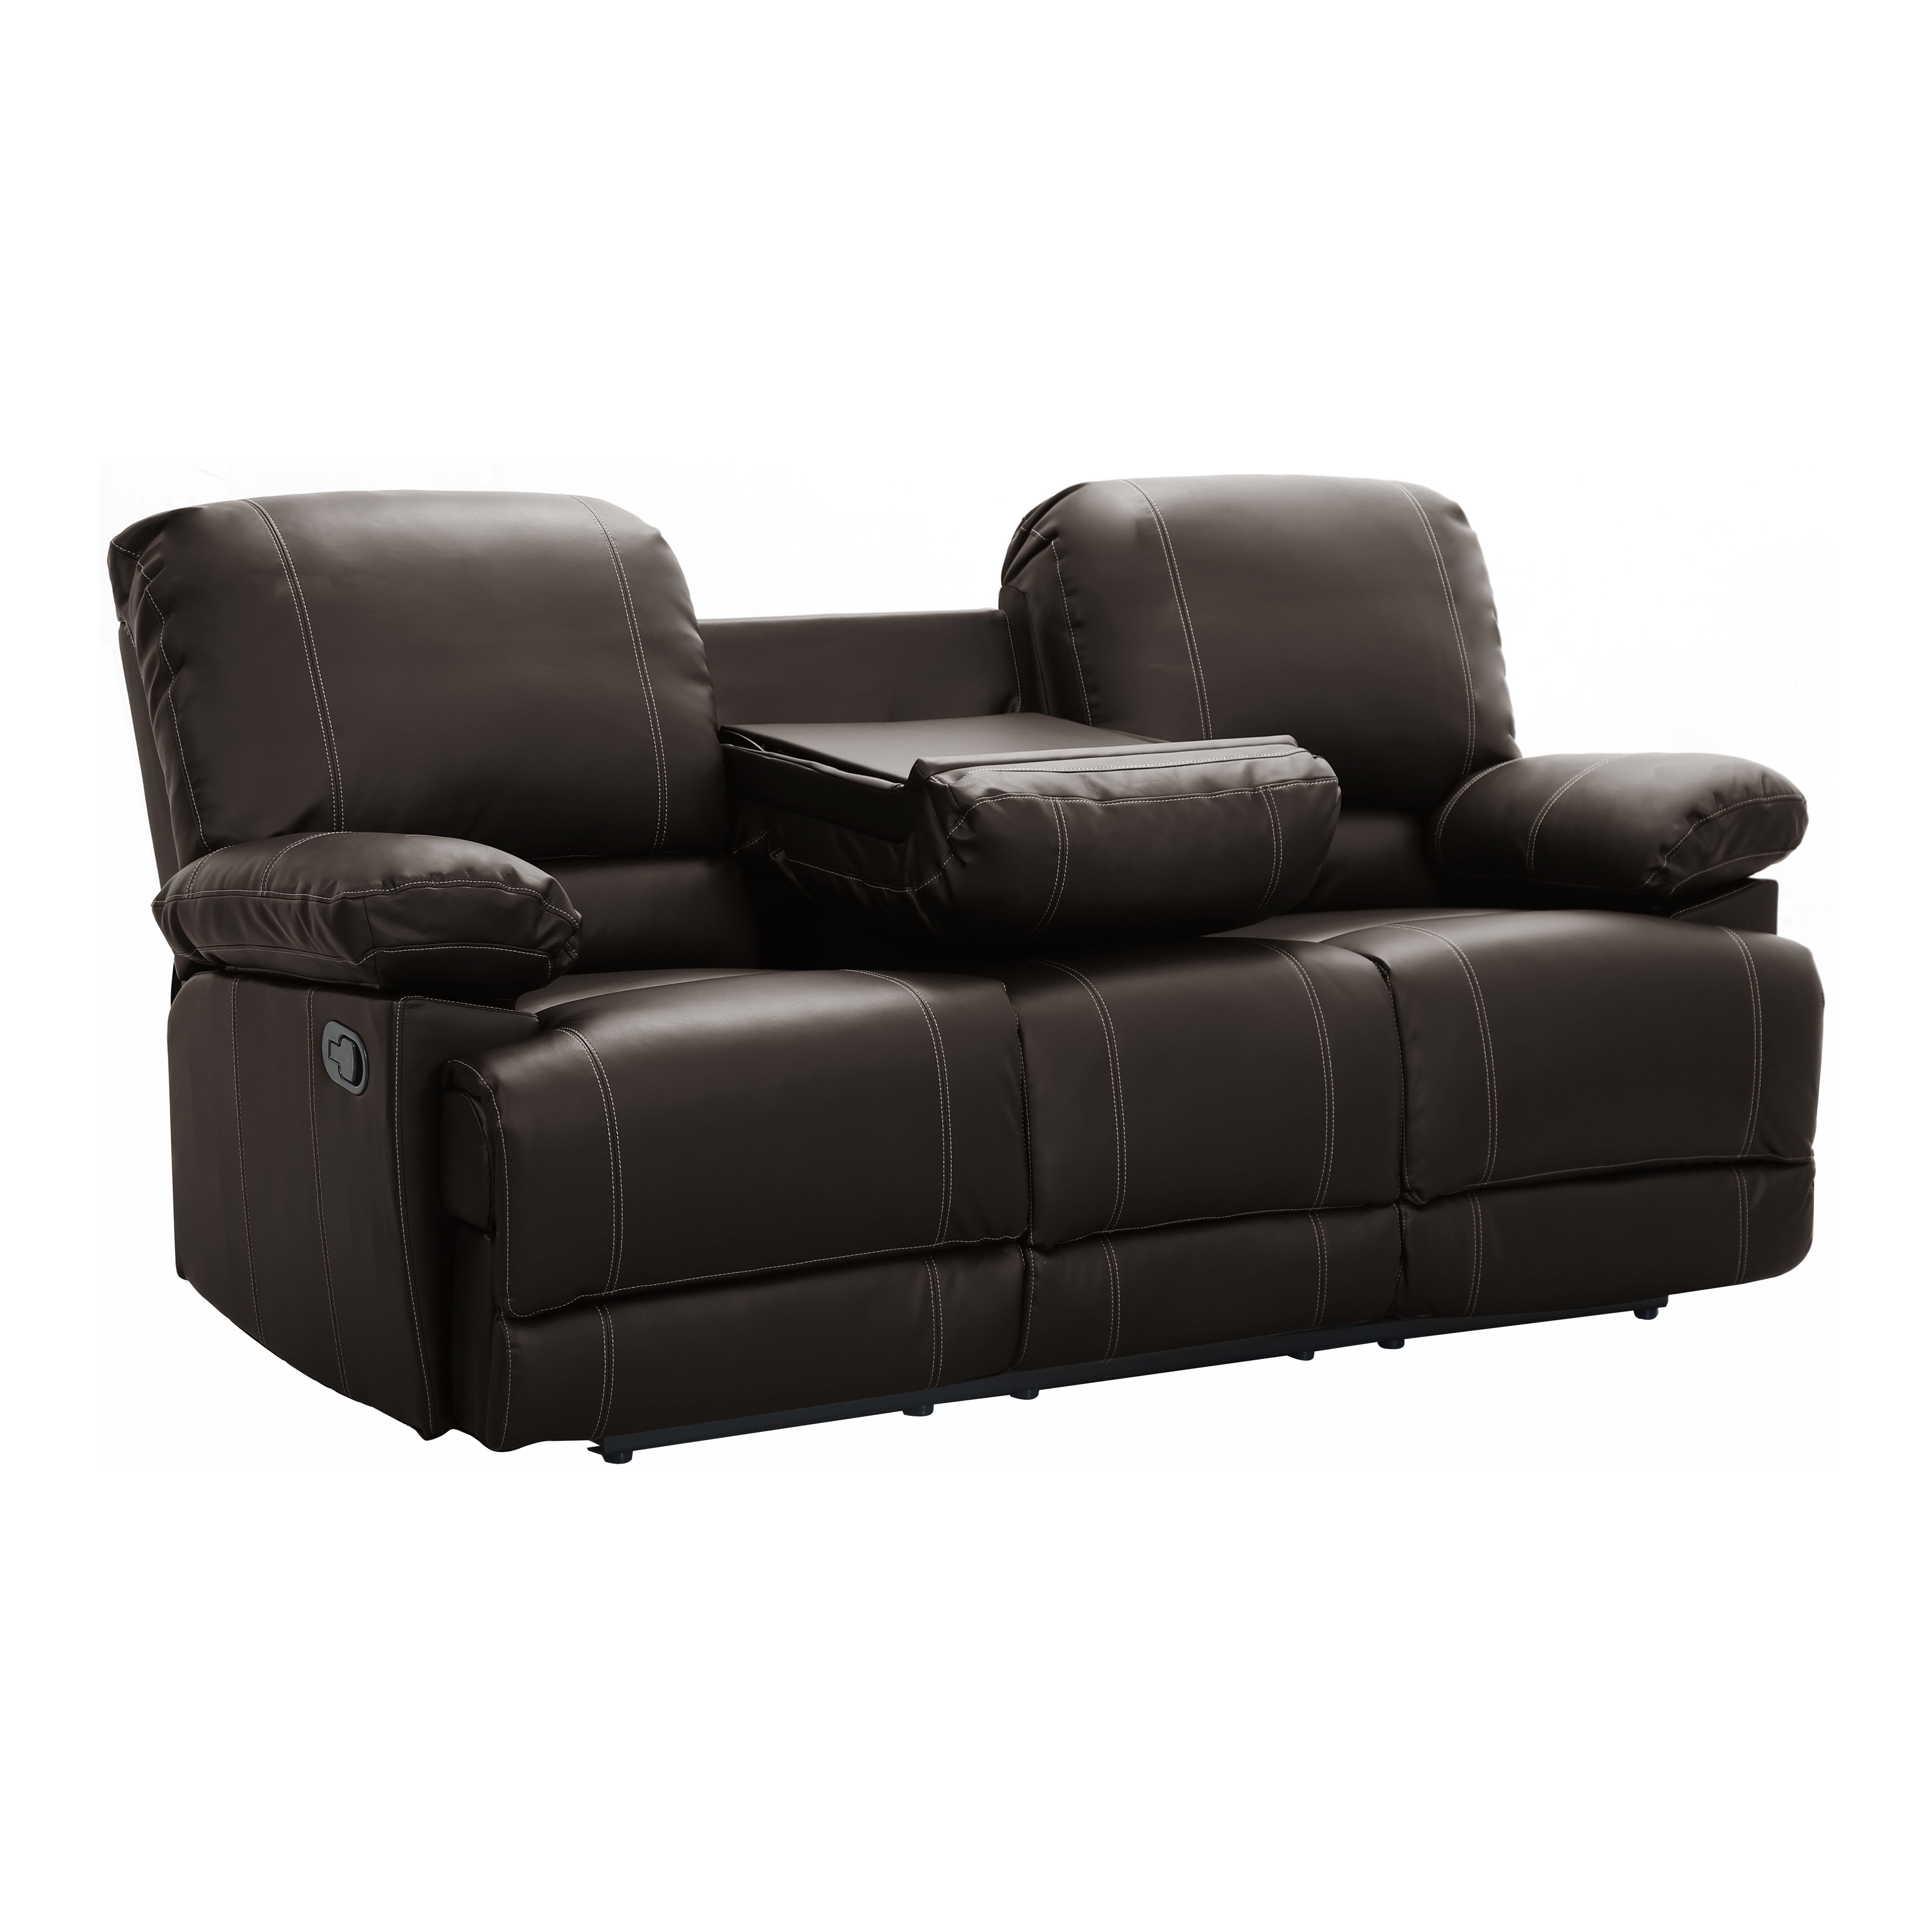 Homelegance Center Hill Bonded Leather Reclining Love seat